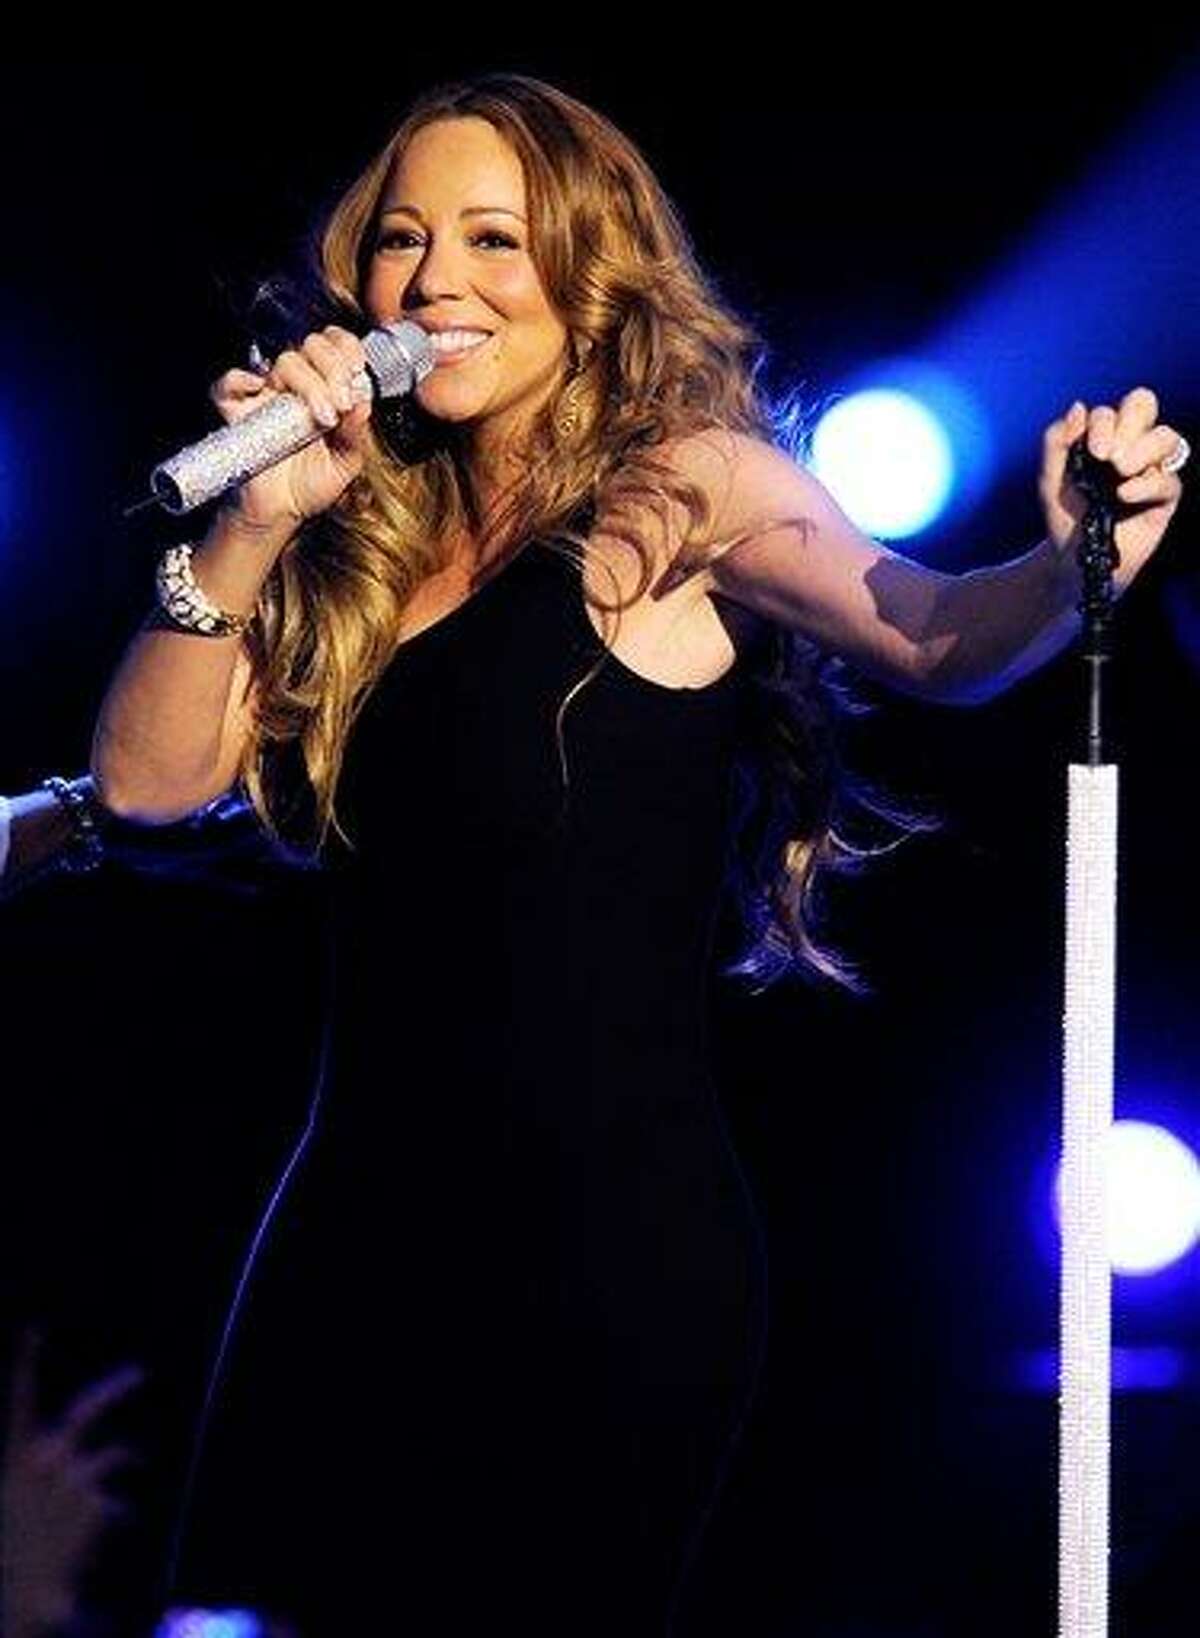 Singer Mariah Carey performs at Caesars Entertainment "Escape to Total Rewards" kick-off at Gotham Hall on Thursday in New York. Associated Press